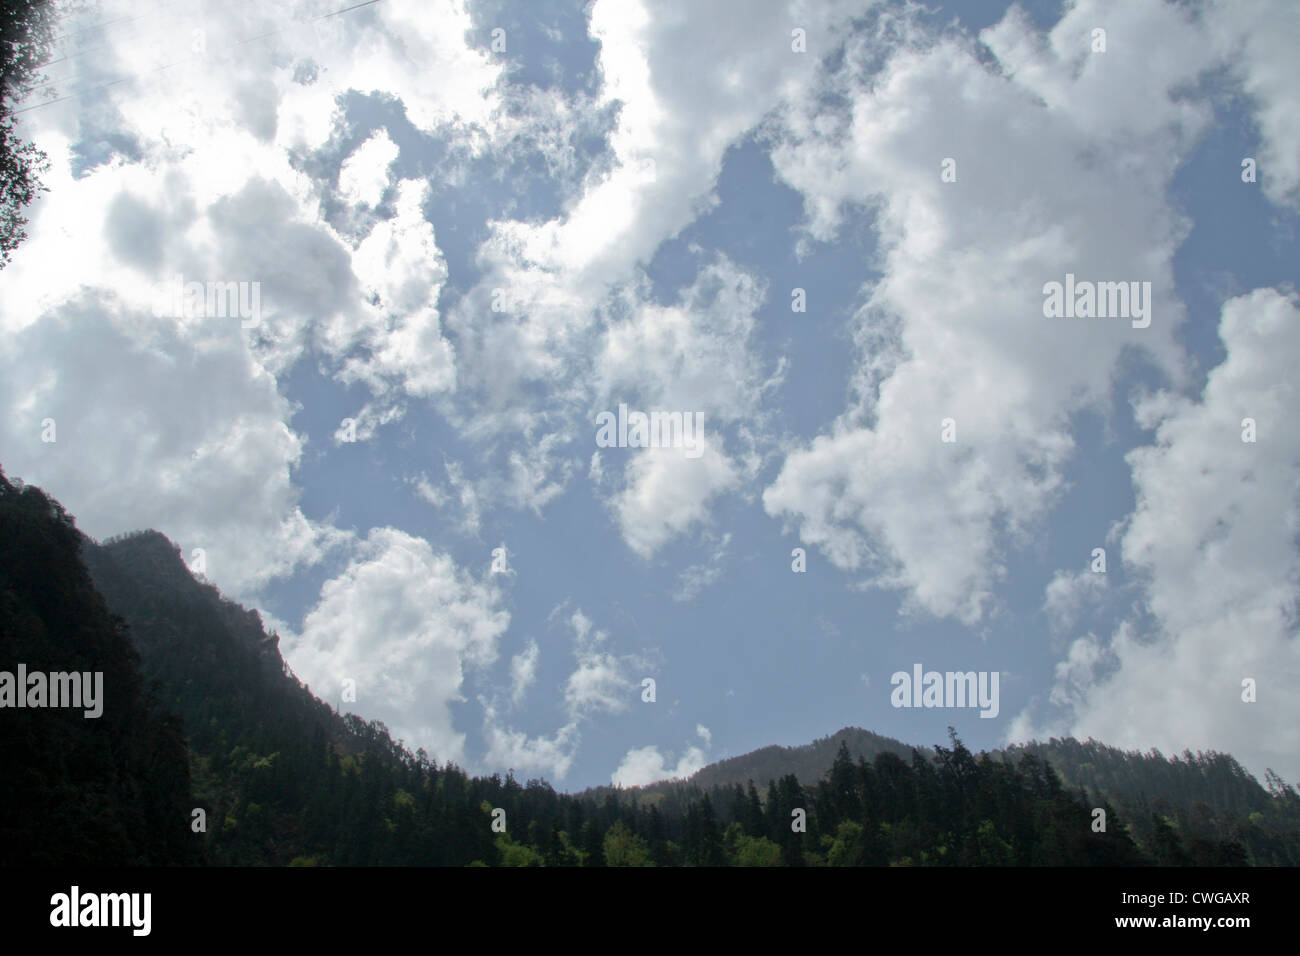 Bright dazzling clouds with dark mountain in foreground Stock Photo